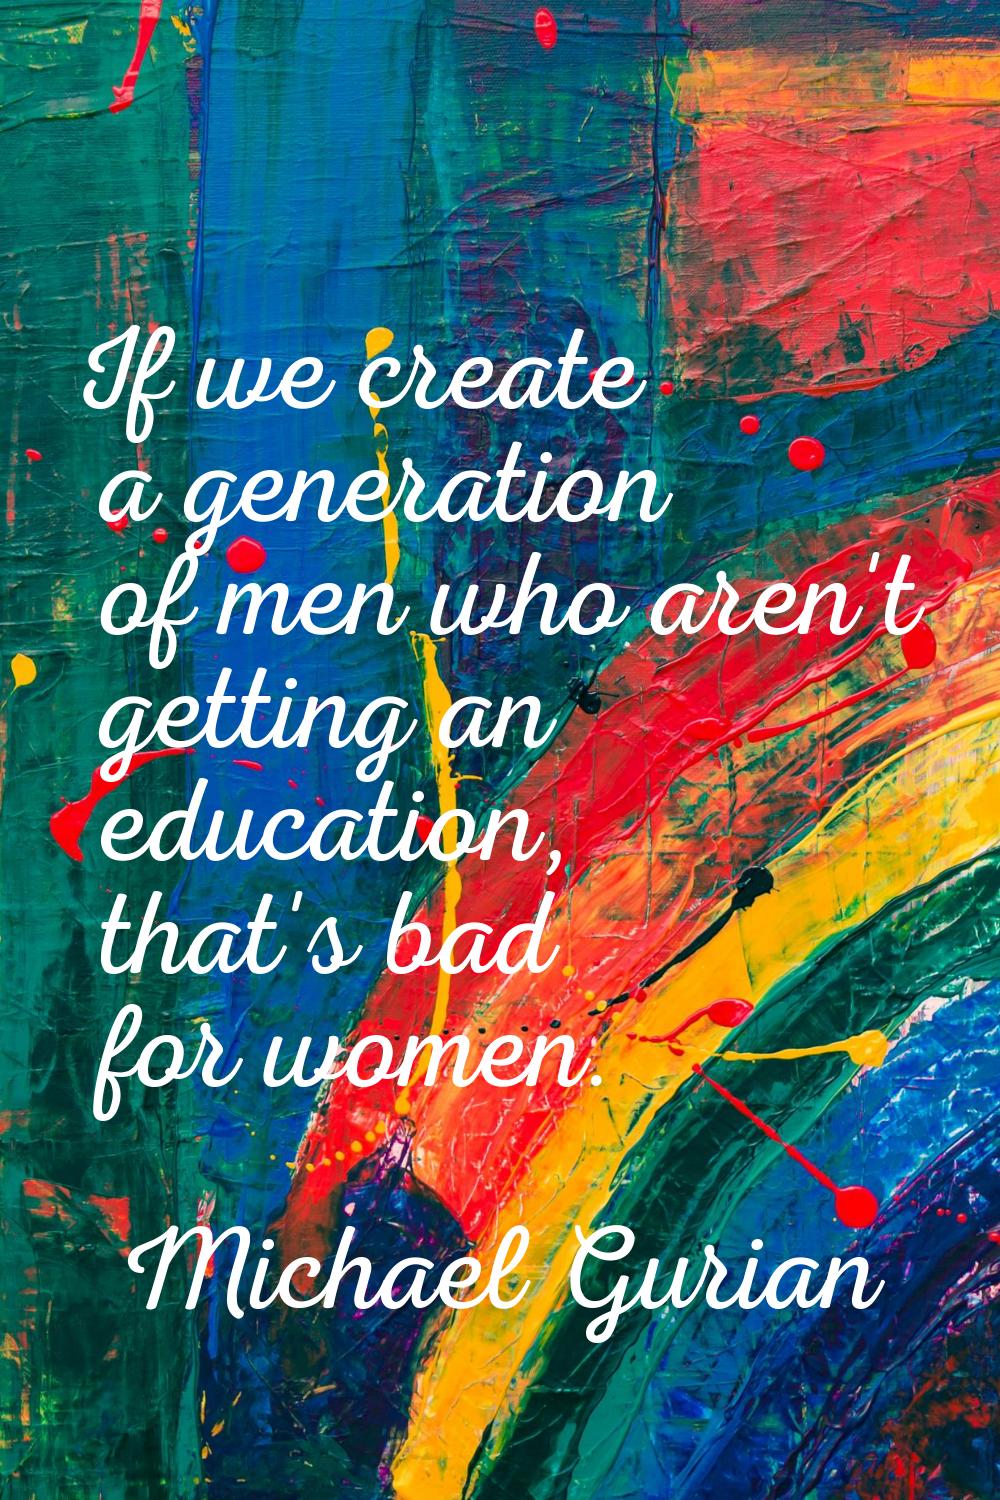 If we create a generation of men who aren't getting an education, that's bad for women.